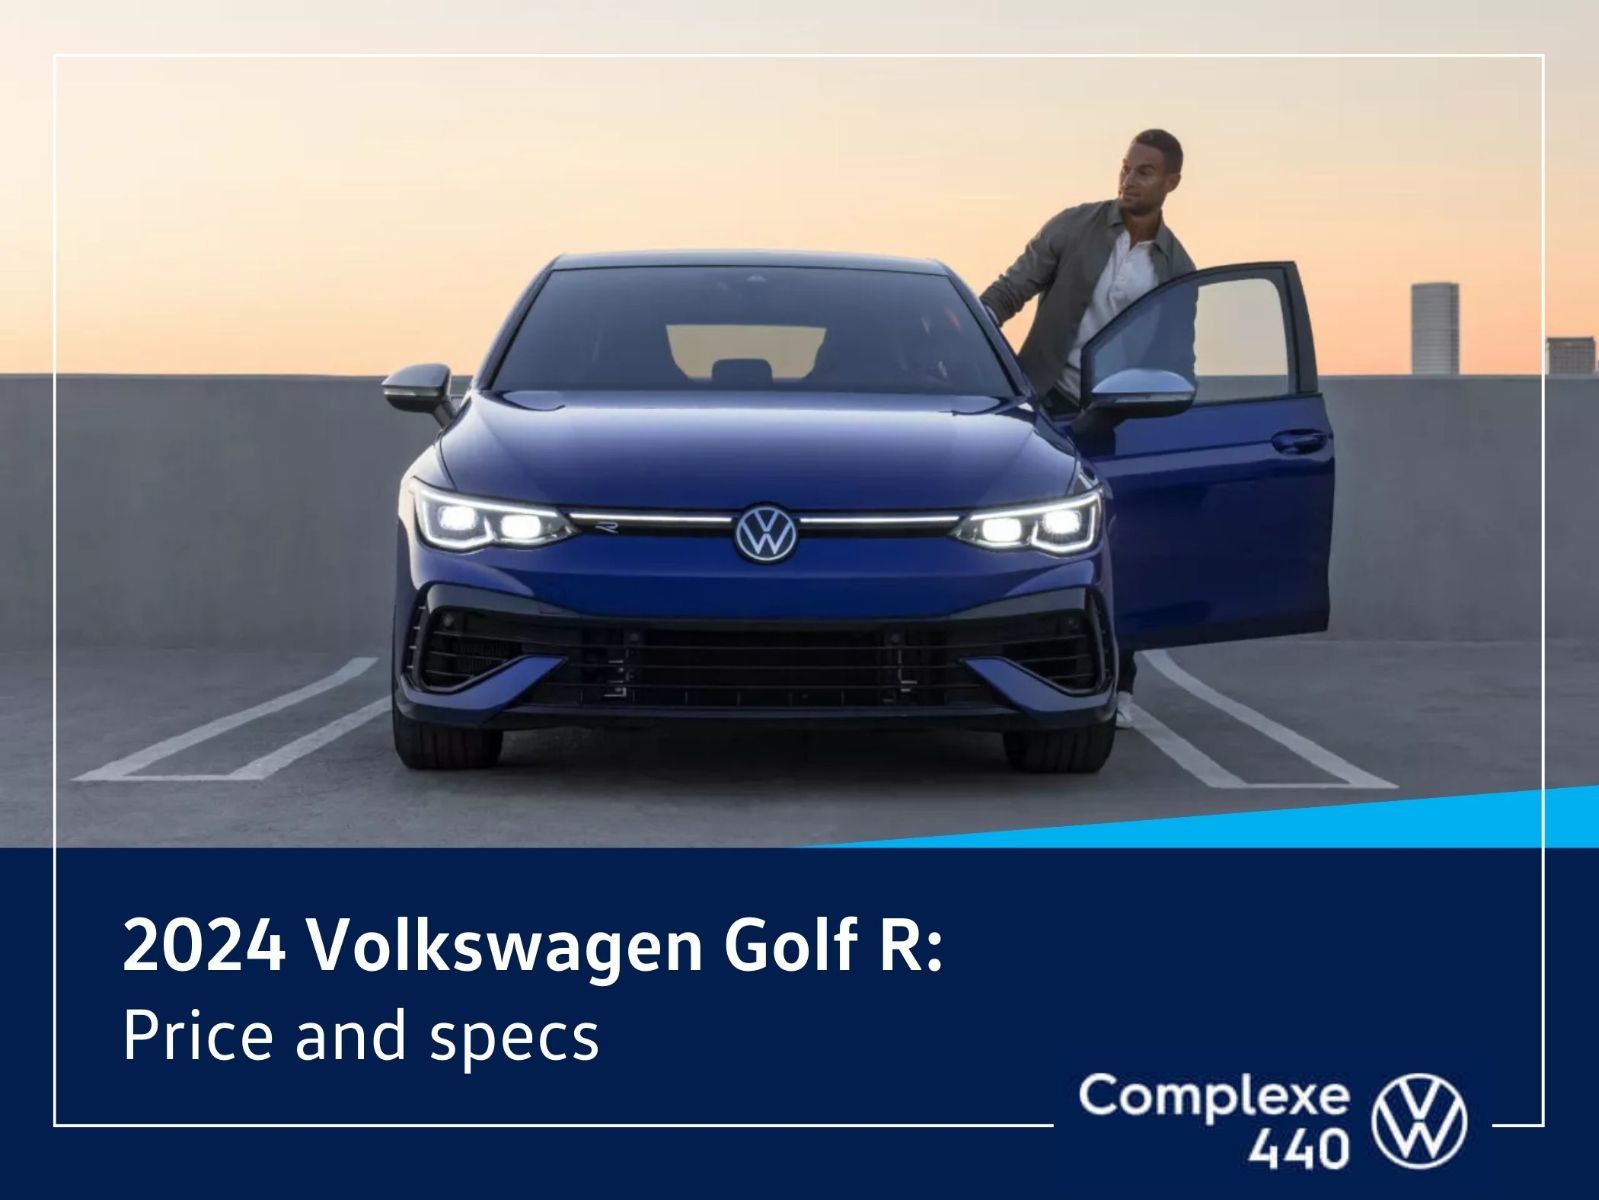 header image - young man taking place in his VW Golf R 2024